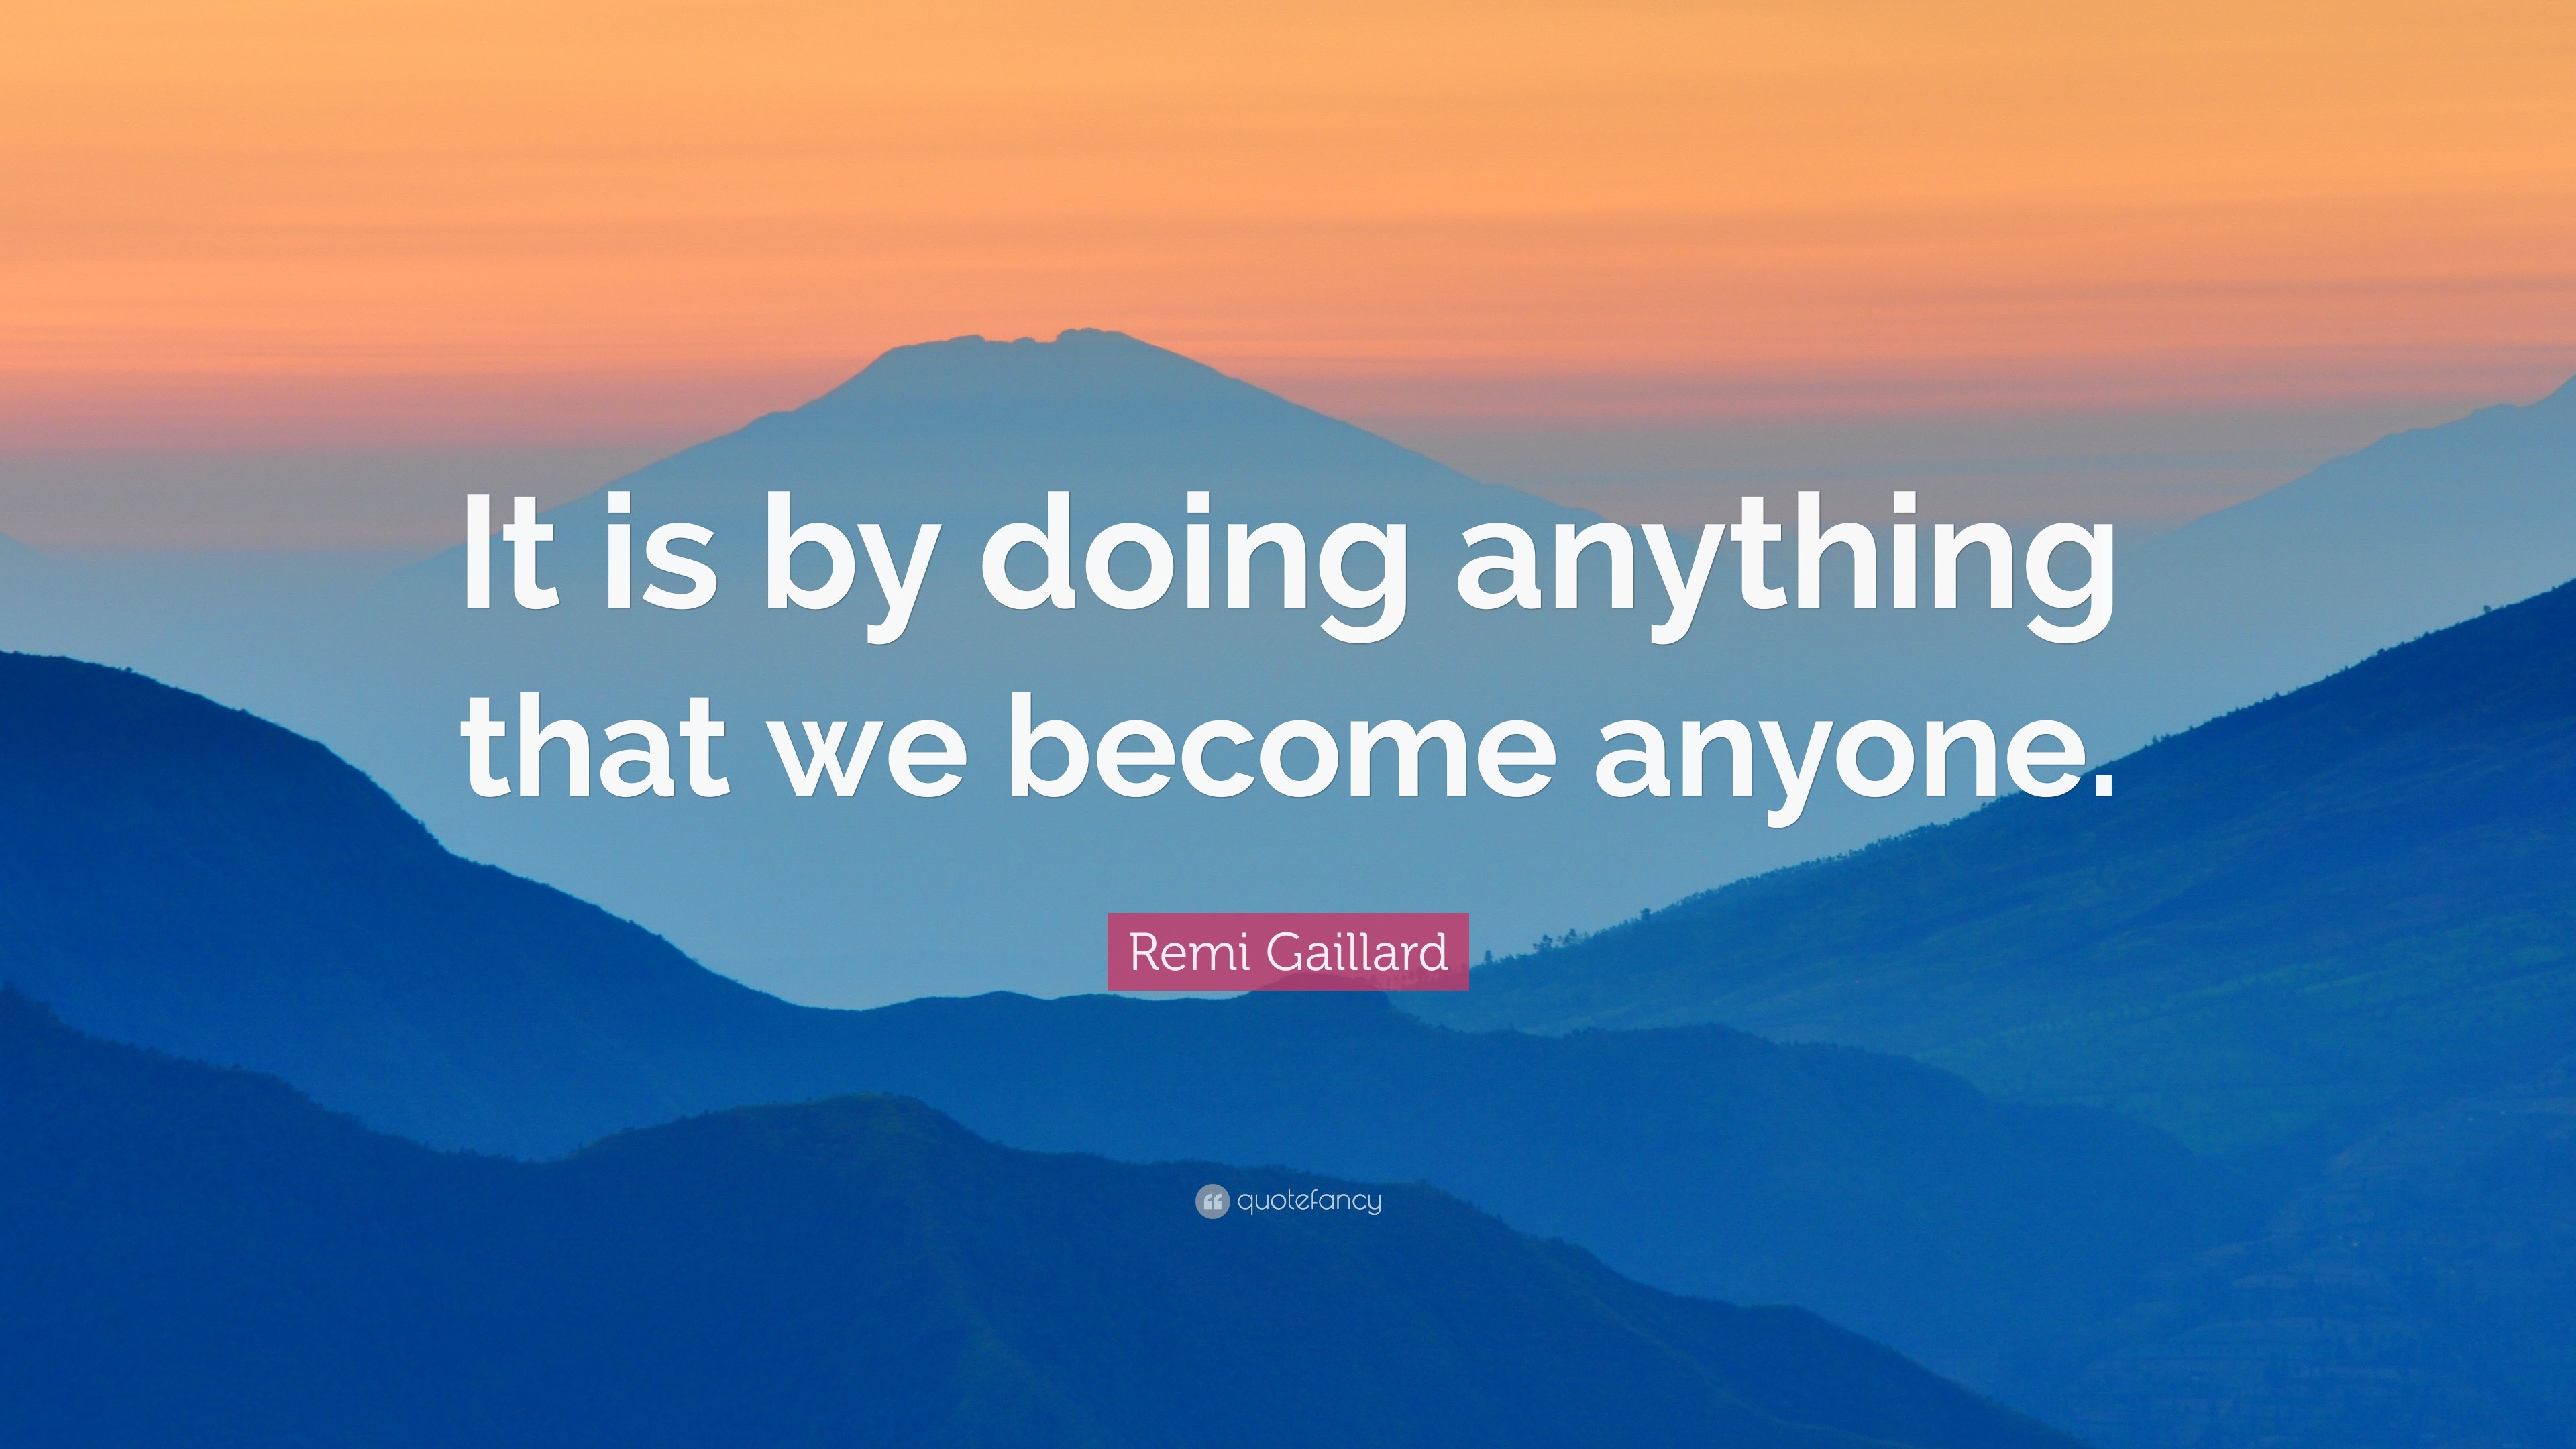 Remi Gaillard Quote: “It is by doing anything that we become anyone.”